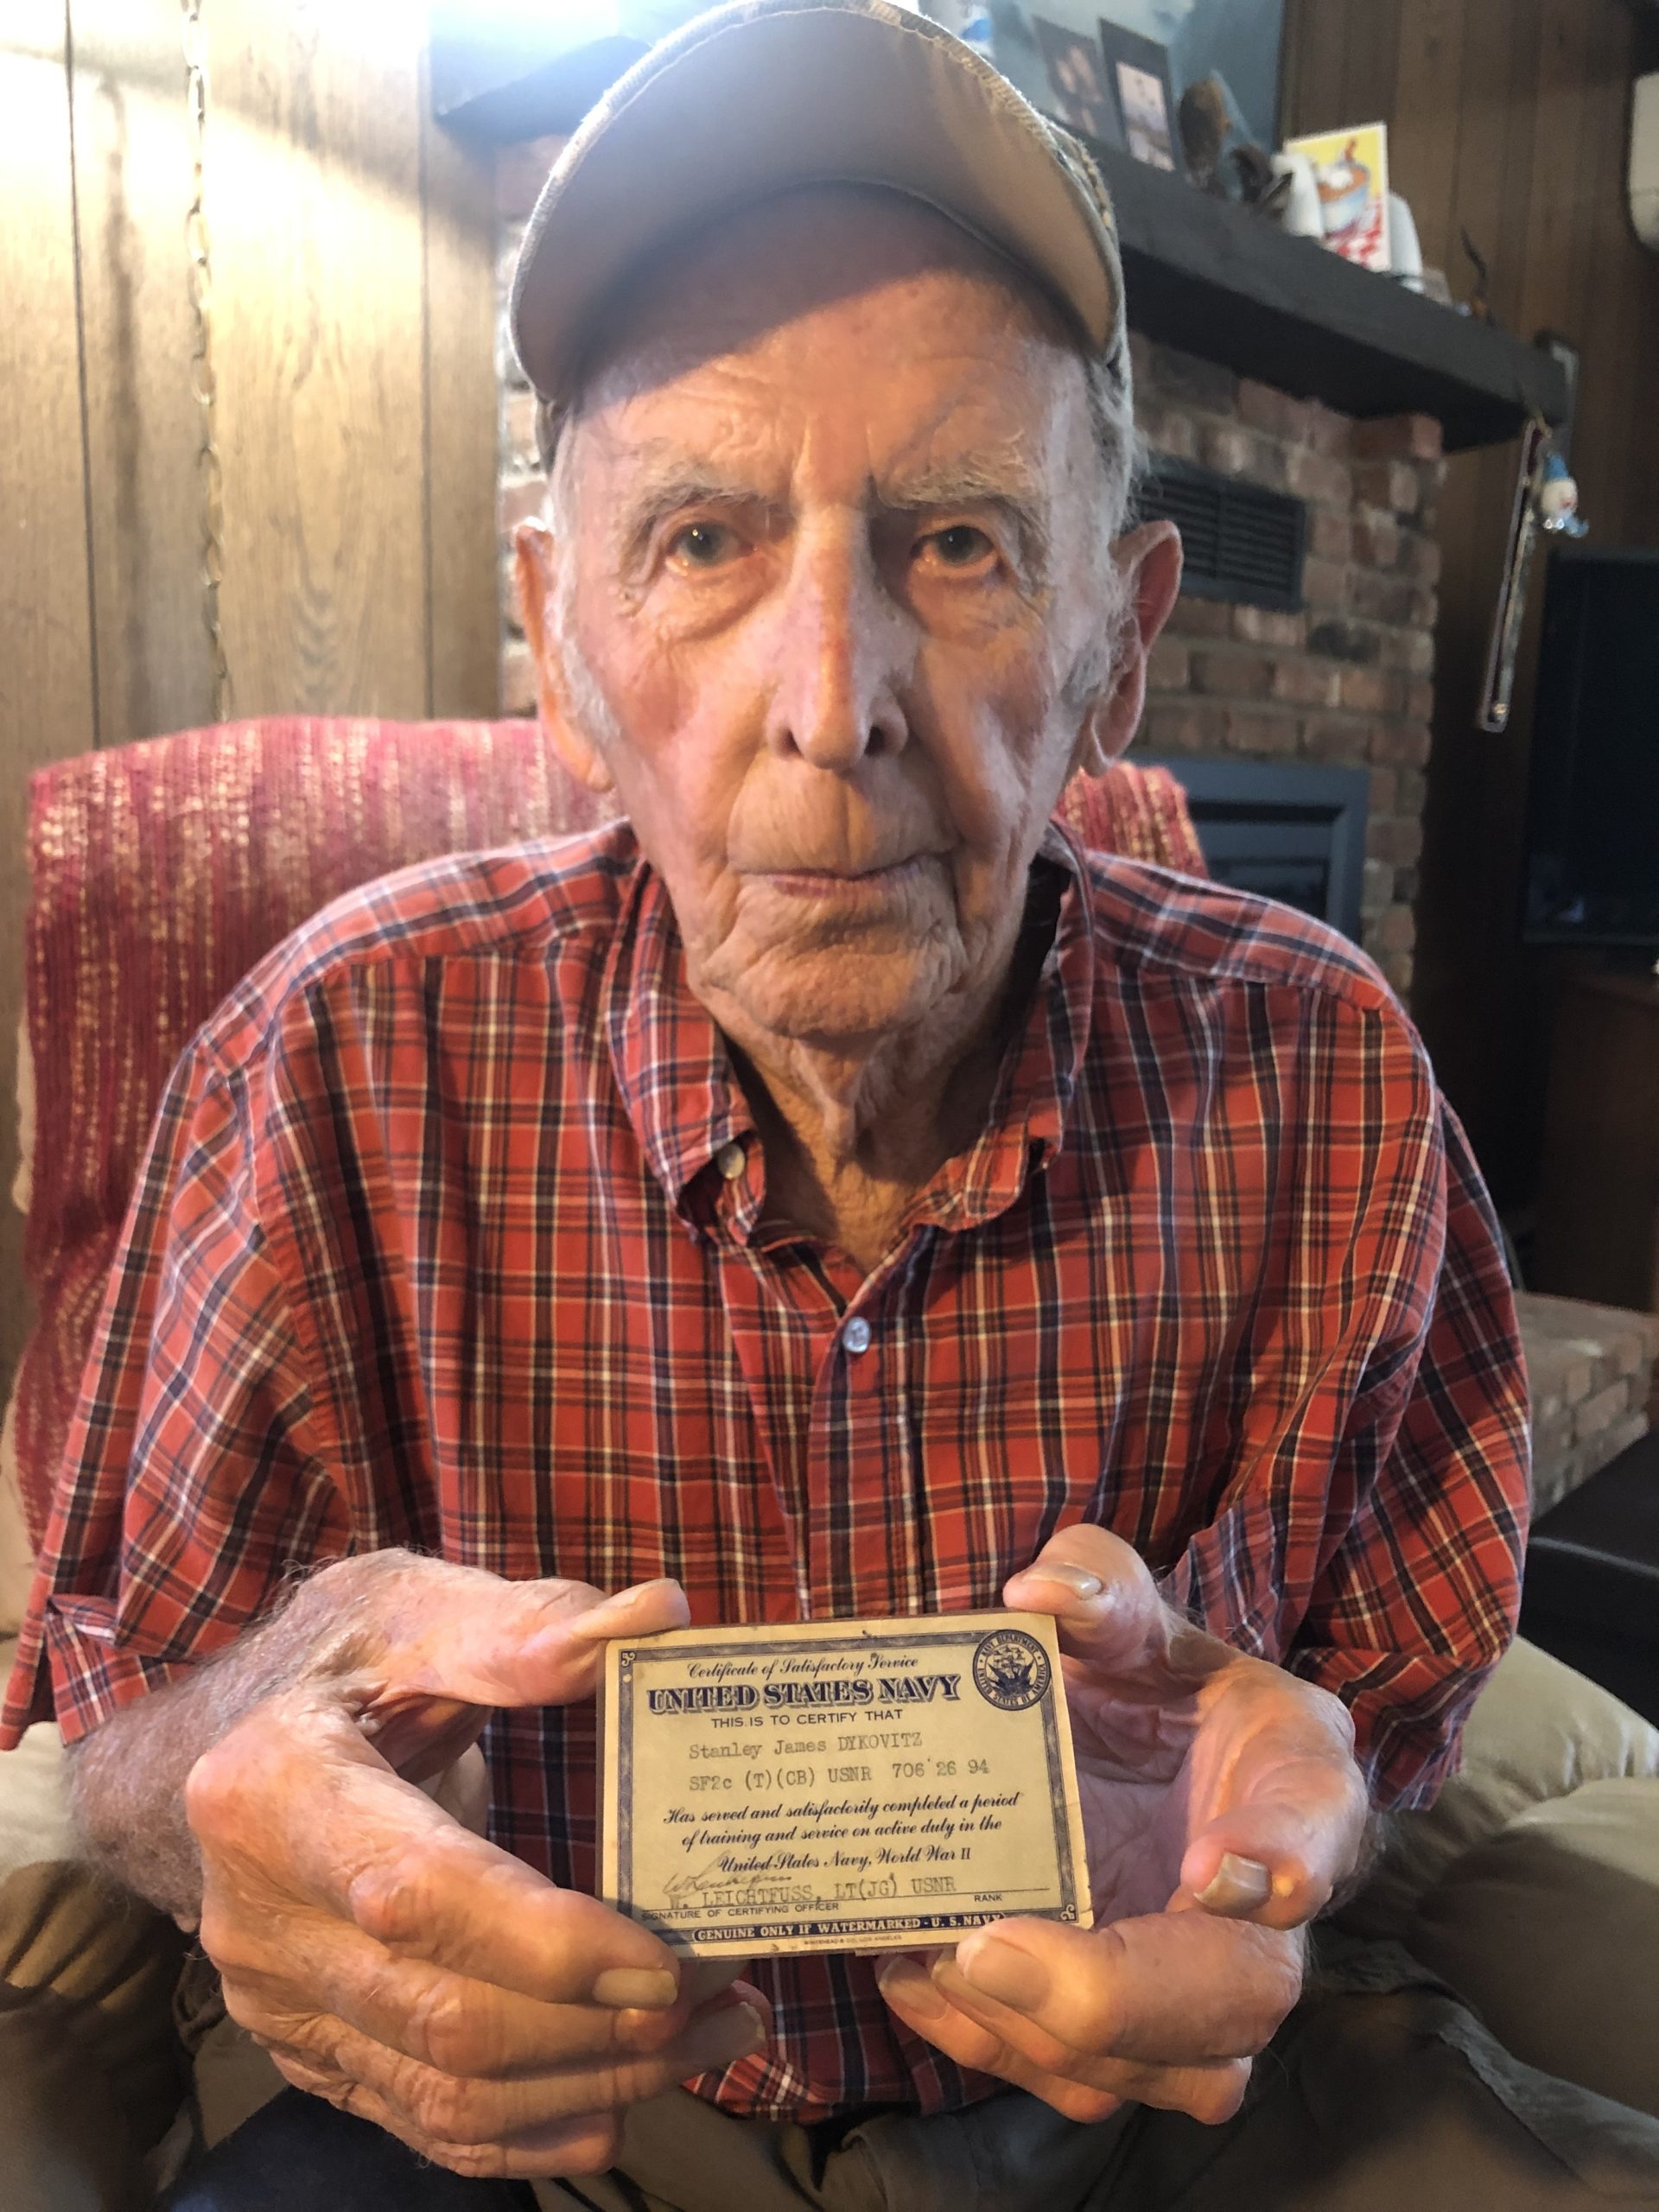 Southampton resident Stanley Dykovitz, a 99-year-old World War II veteran (who will turn 100 on Christmas Eve), still carries in his wallet his discharge card from his time serving in the U.S.  Navy. He's had the card in his wallet for more than 70 years.